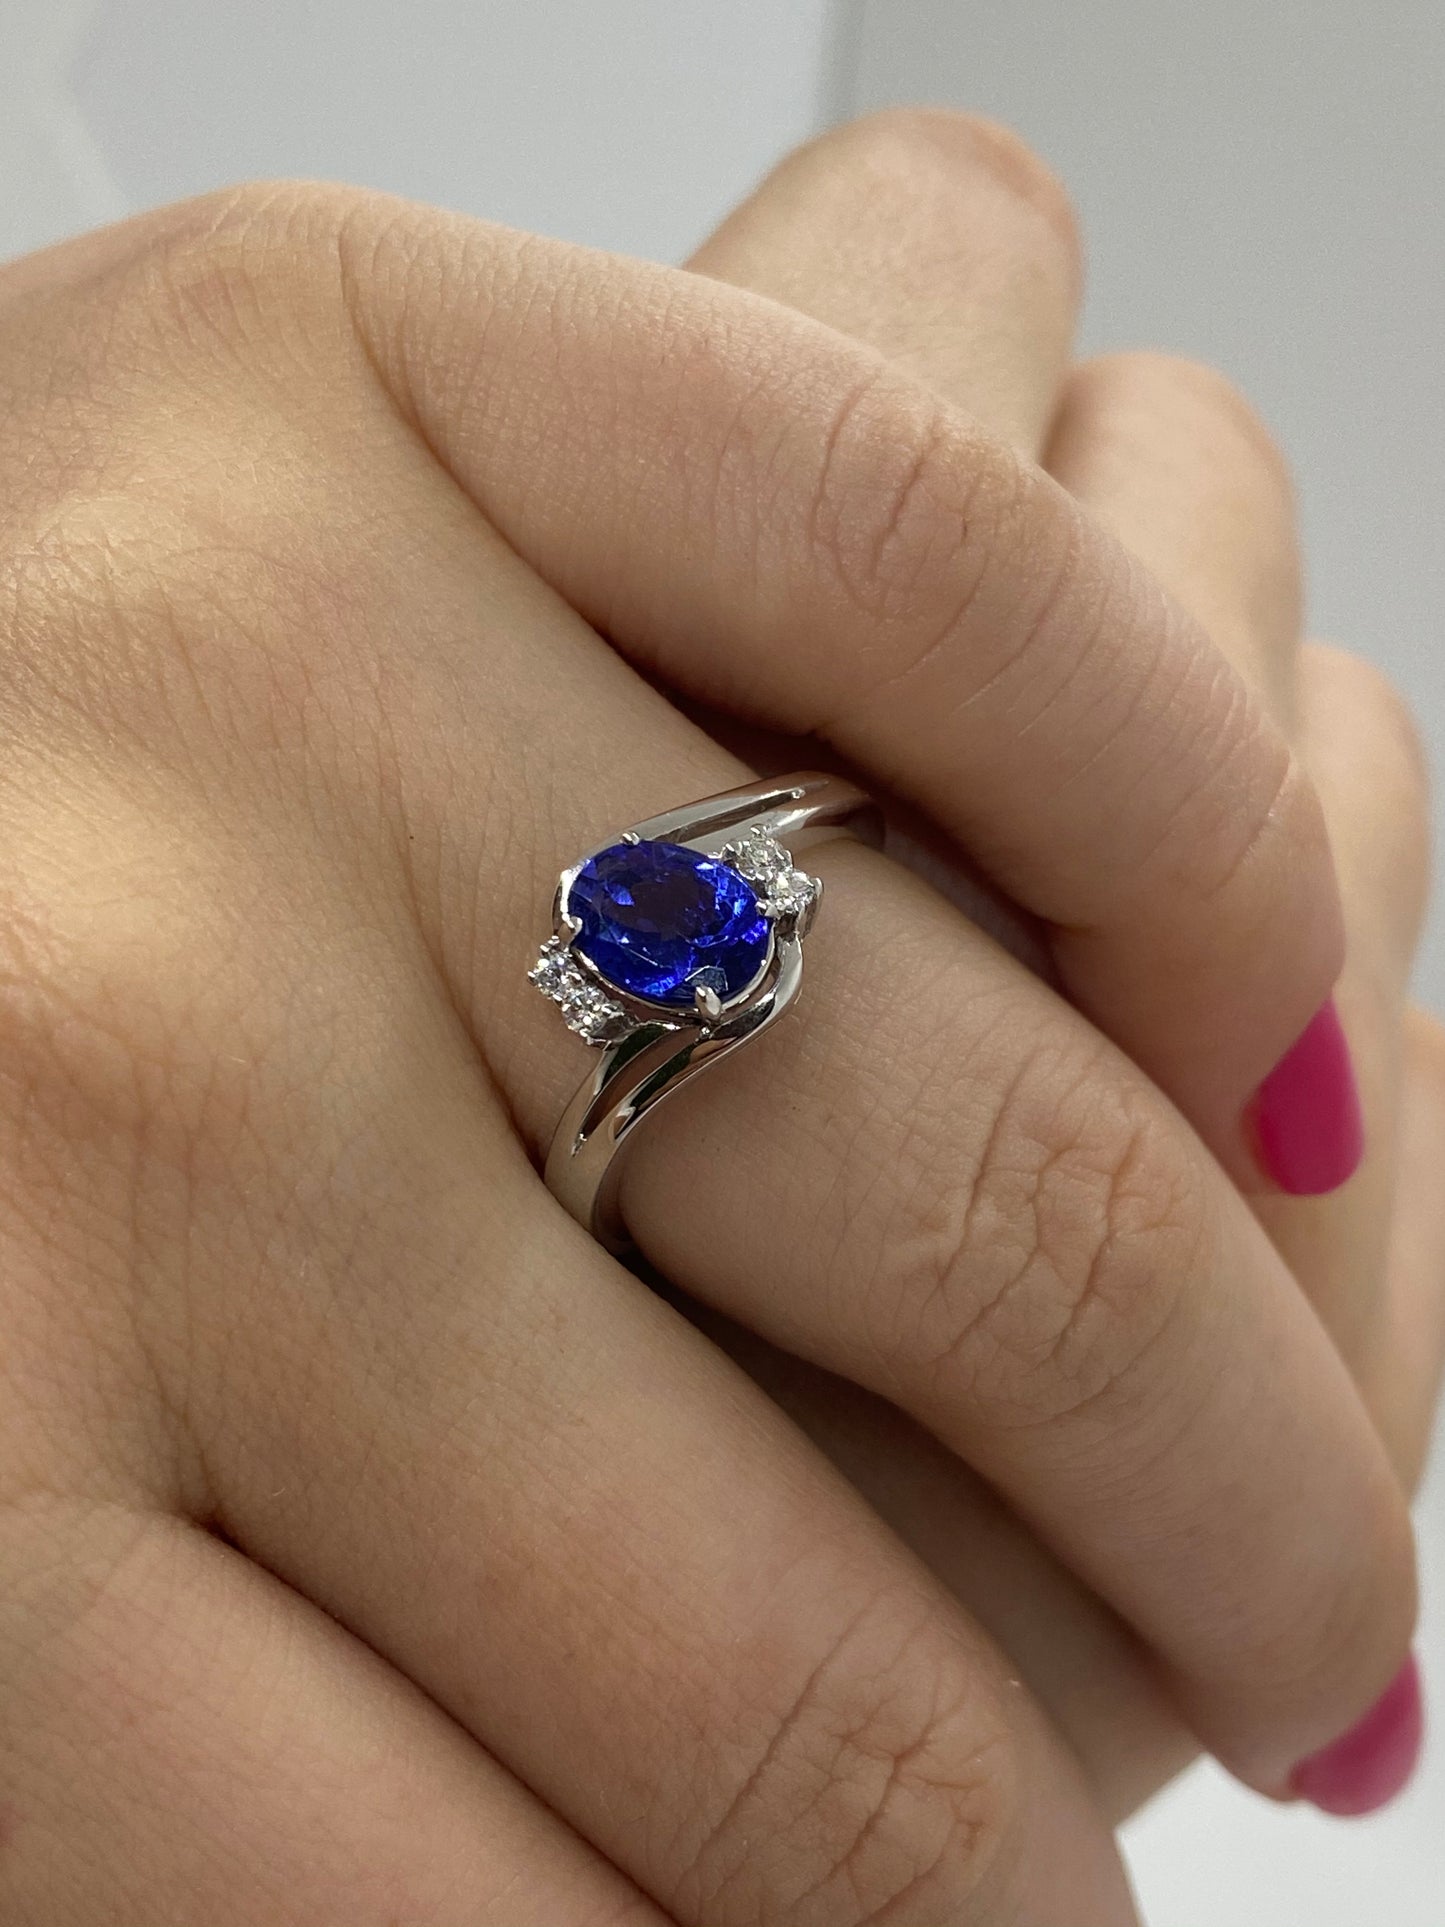 Tanzanite Ring R22607 - Royal Gems and Jewelry